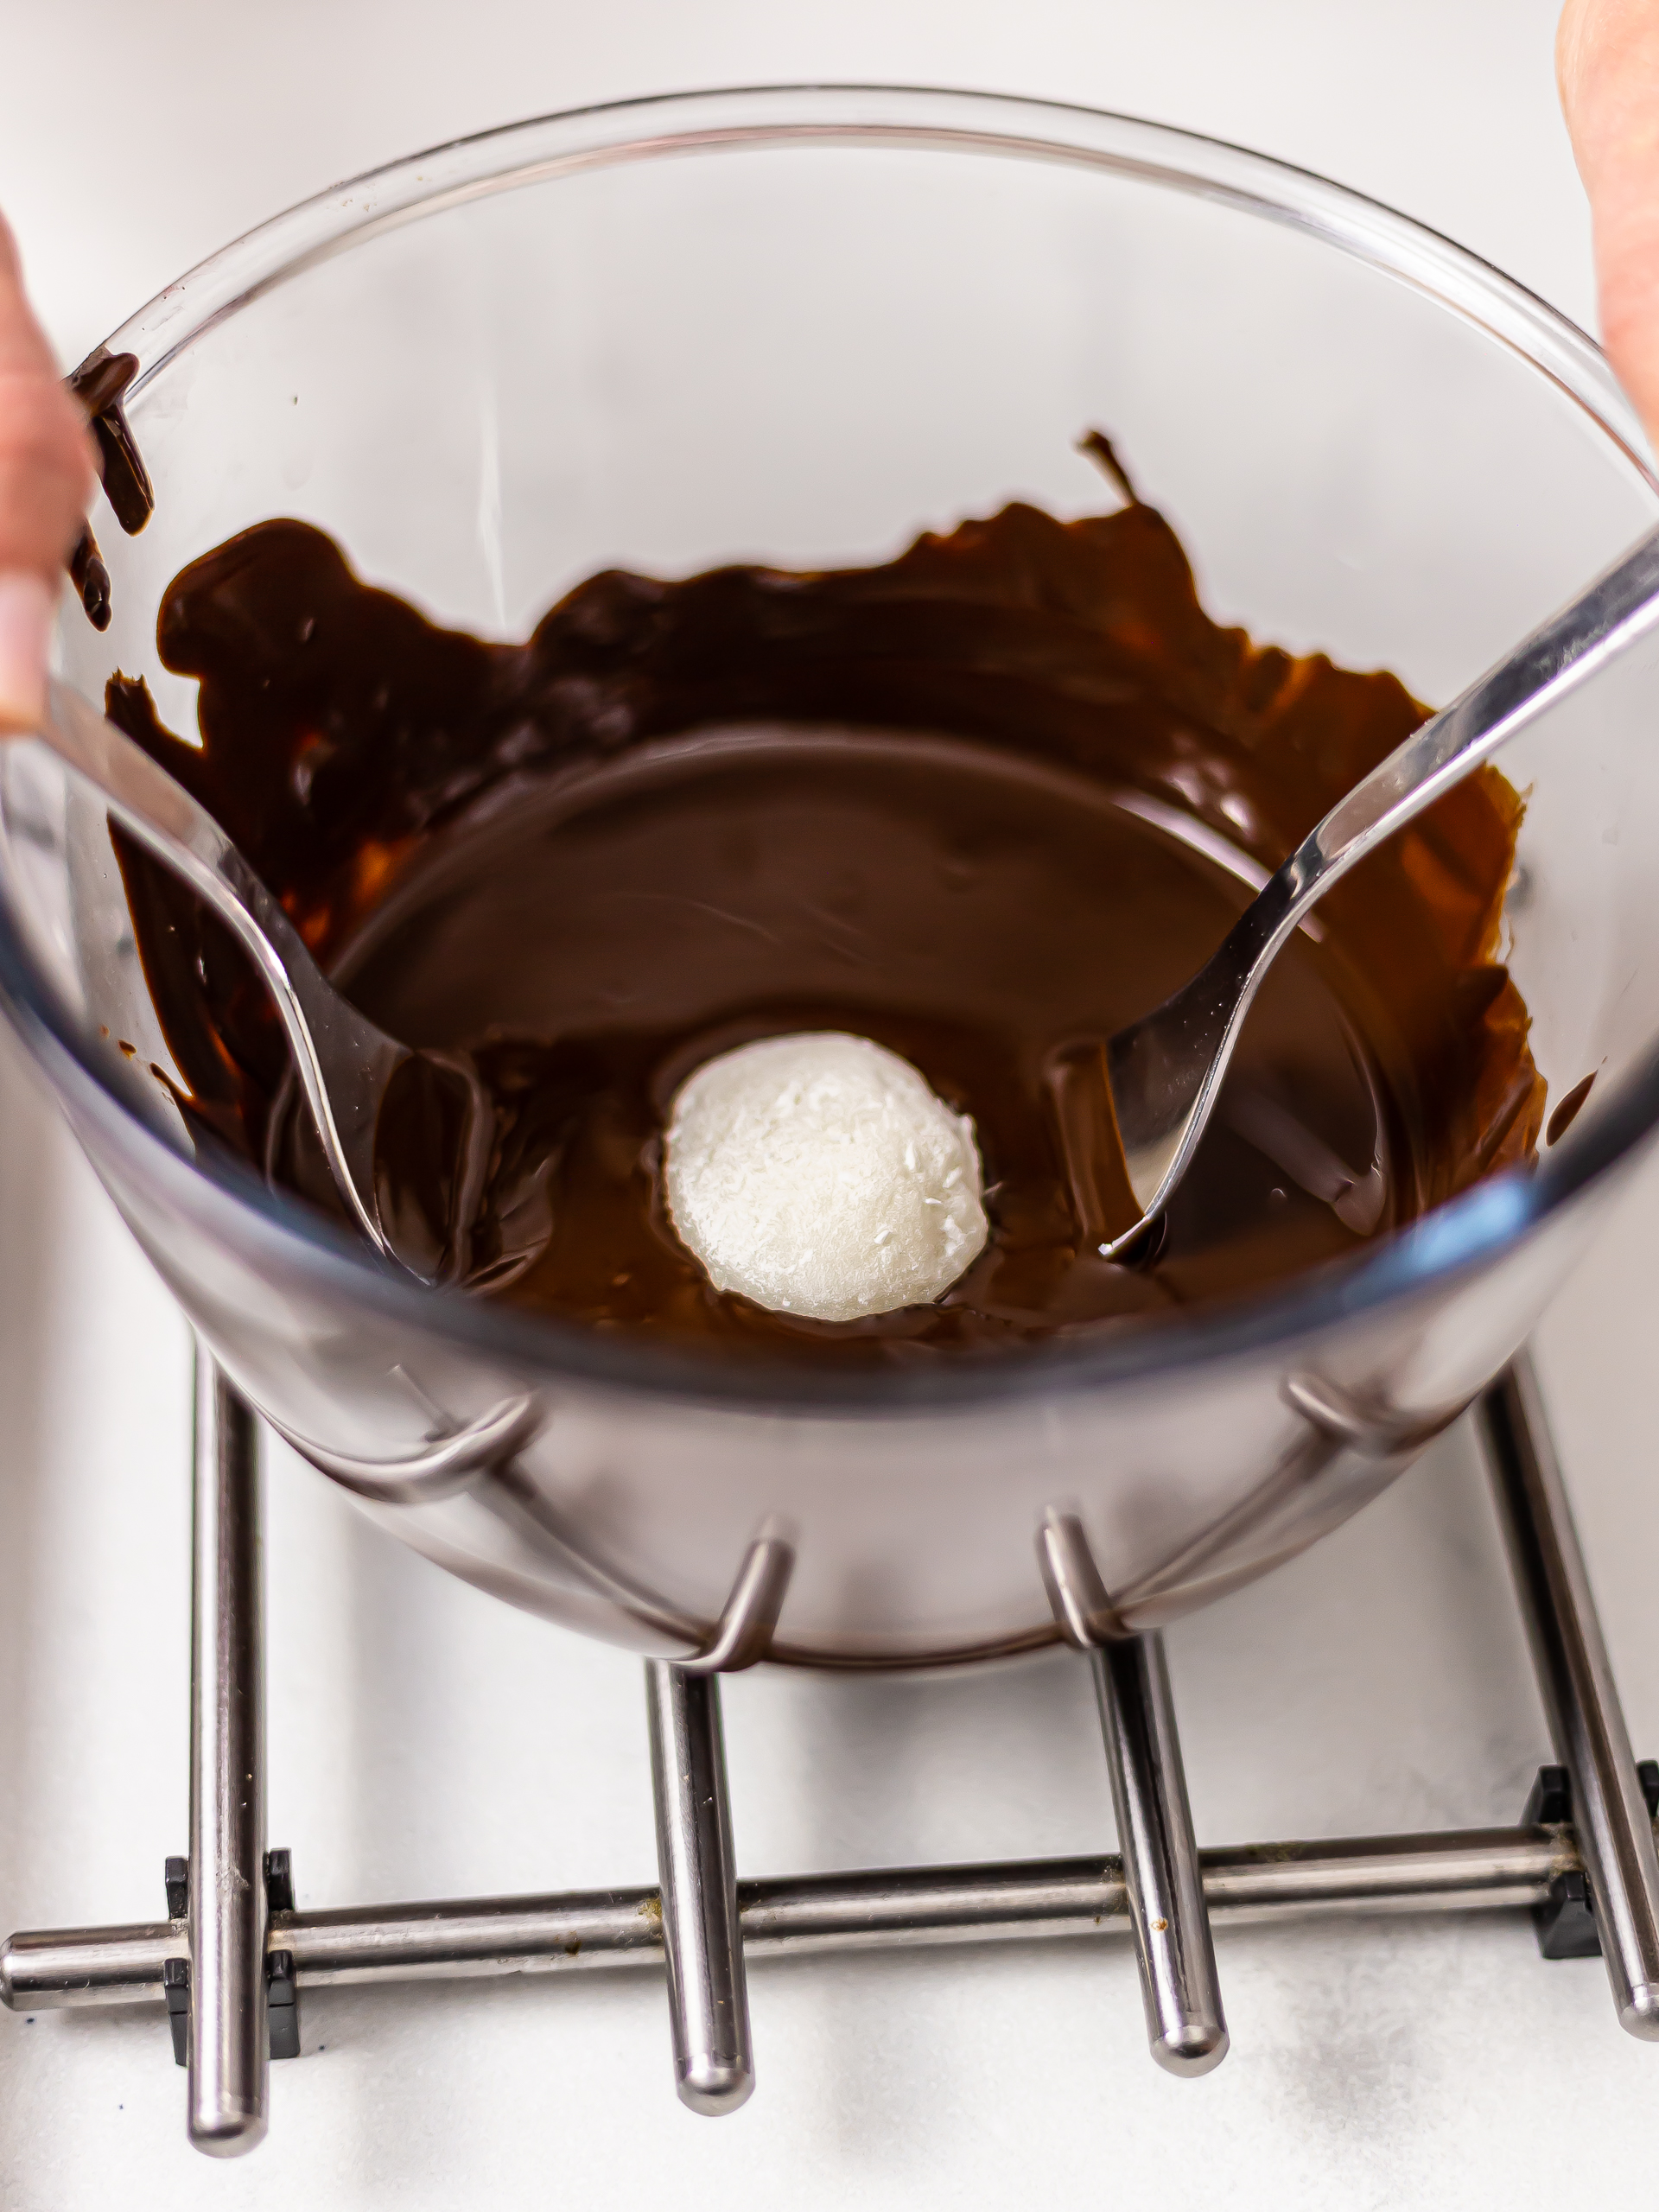 mochi ball dipped in melted chocolate